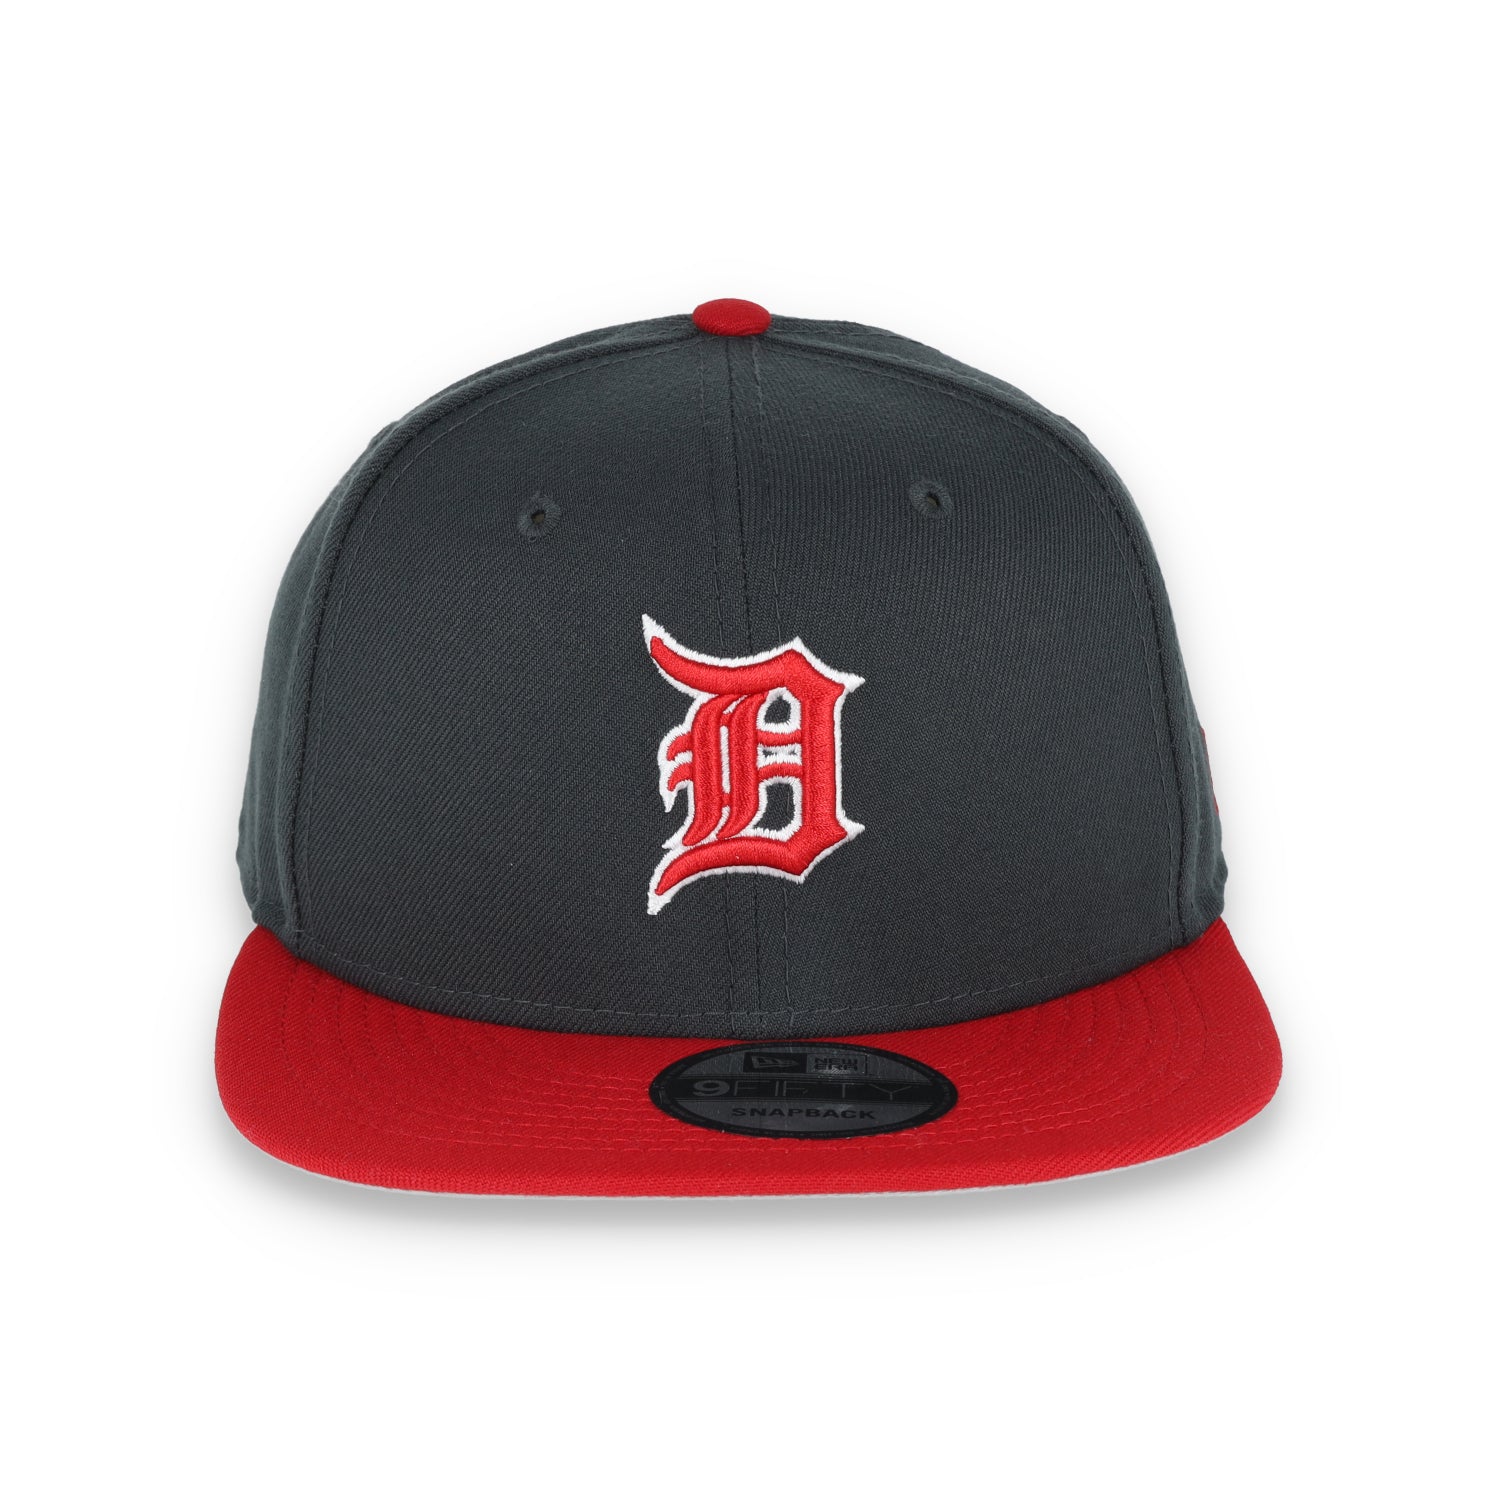 New Era Detroit Tigers 2-Tone Color Pack 9FIFTY Snapback Hat- Grey/Scarlet